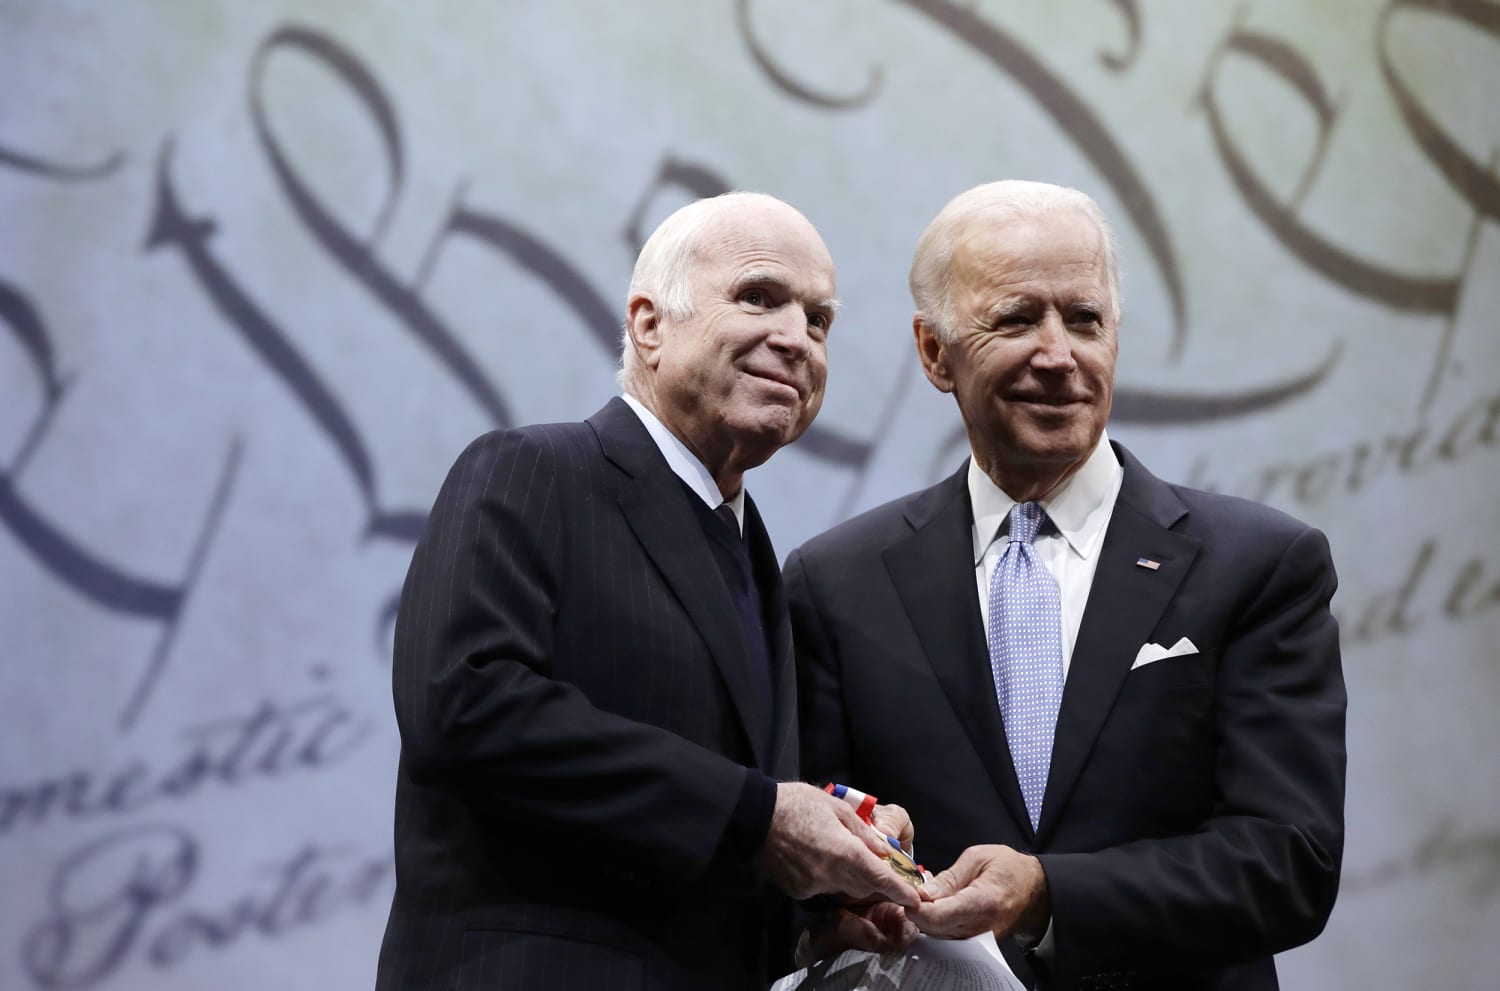 Biden and McCains longtime friendship to be on display at memorial service picture